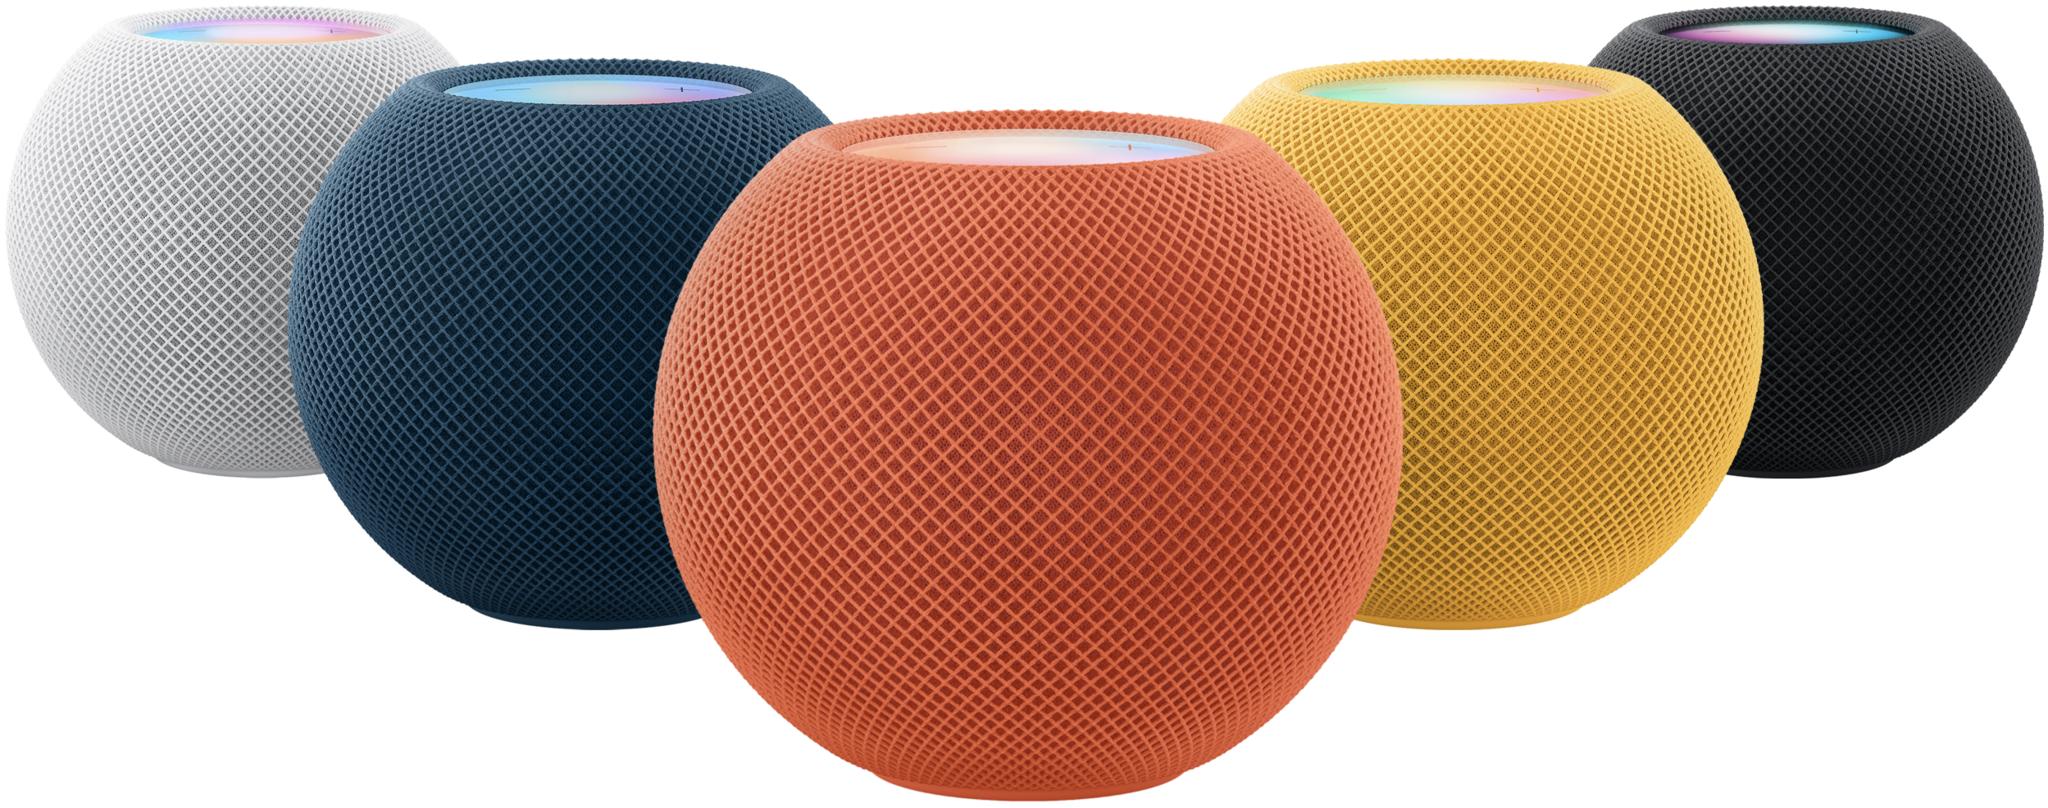 Homepod Mini 2021 Colors Render Cropped